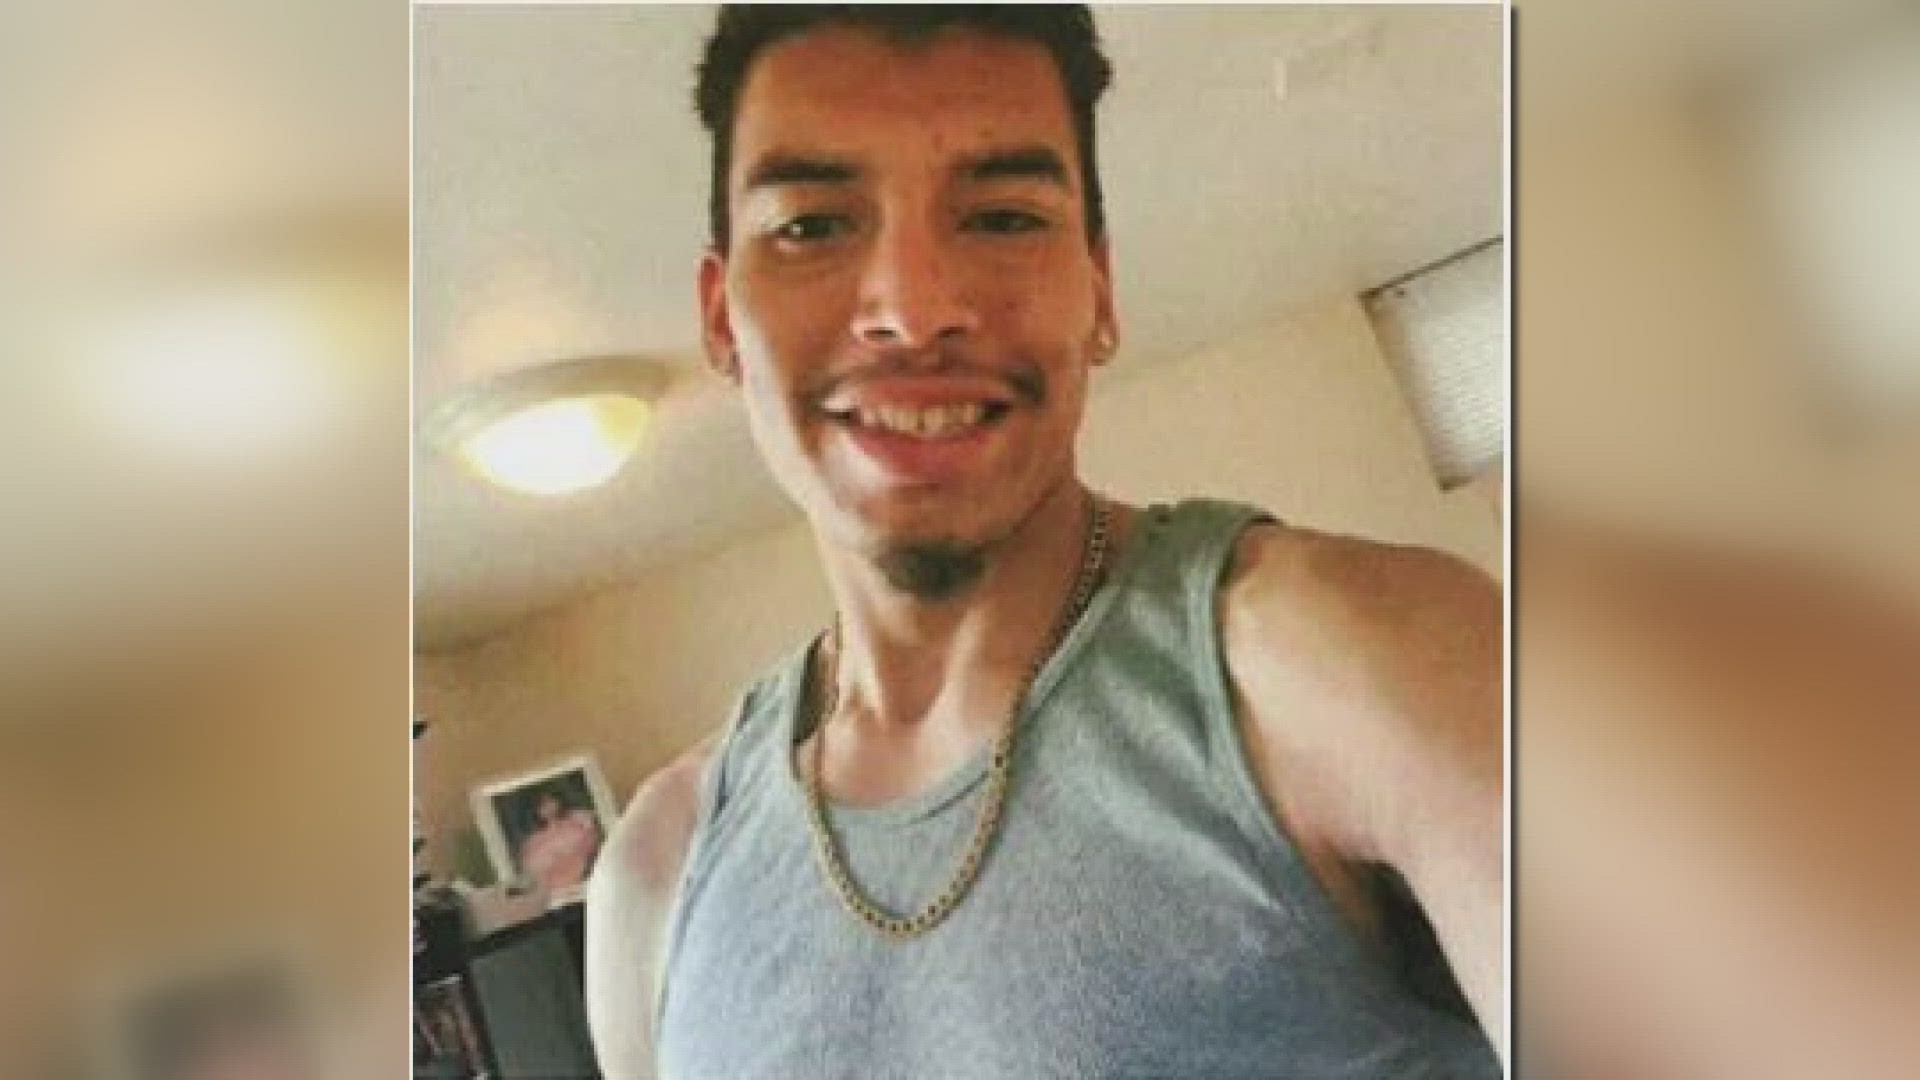 Police say Alexander Piceno has not been heard from since March 23.